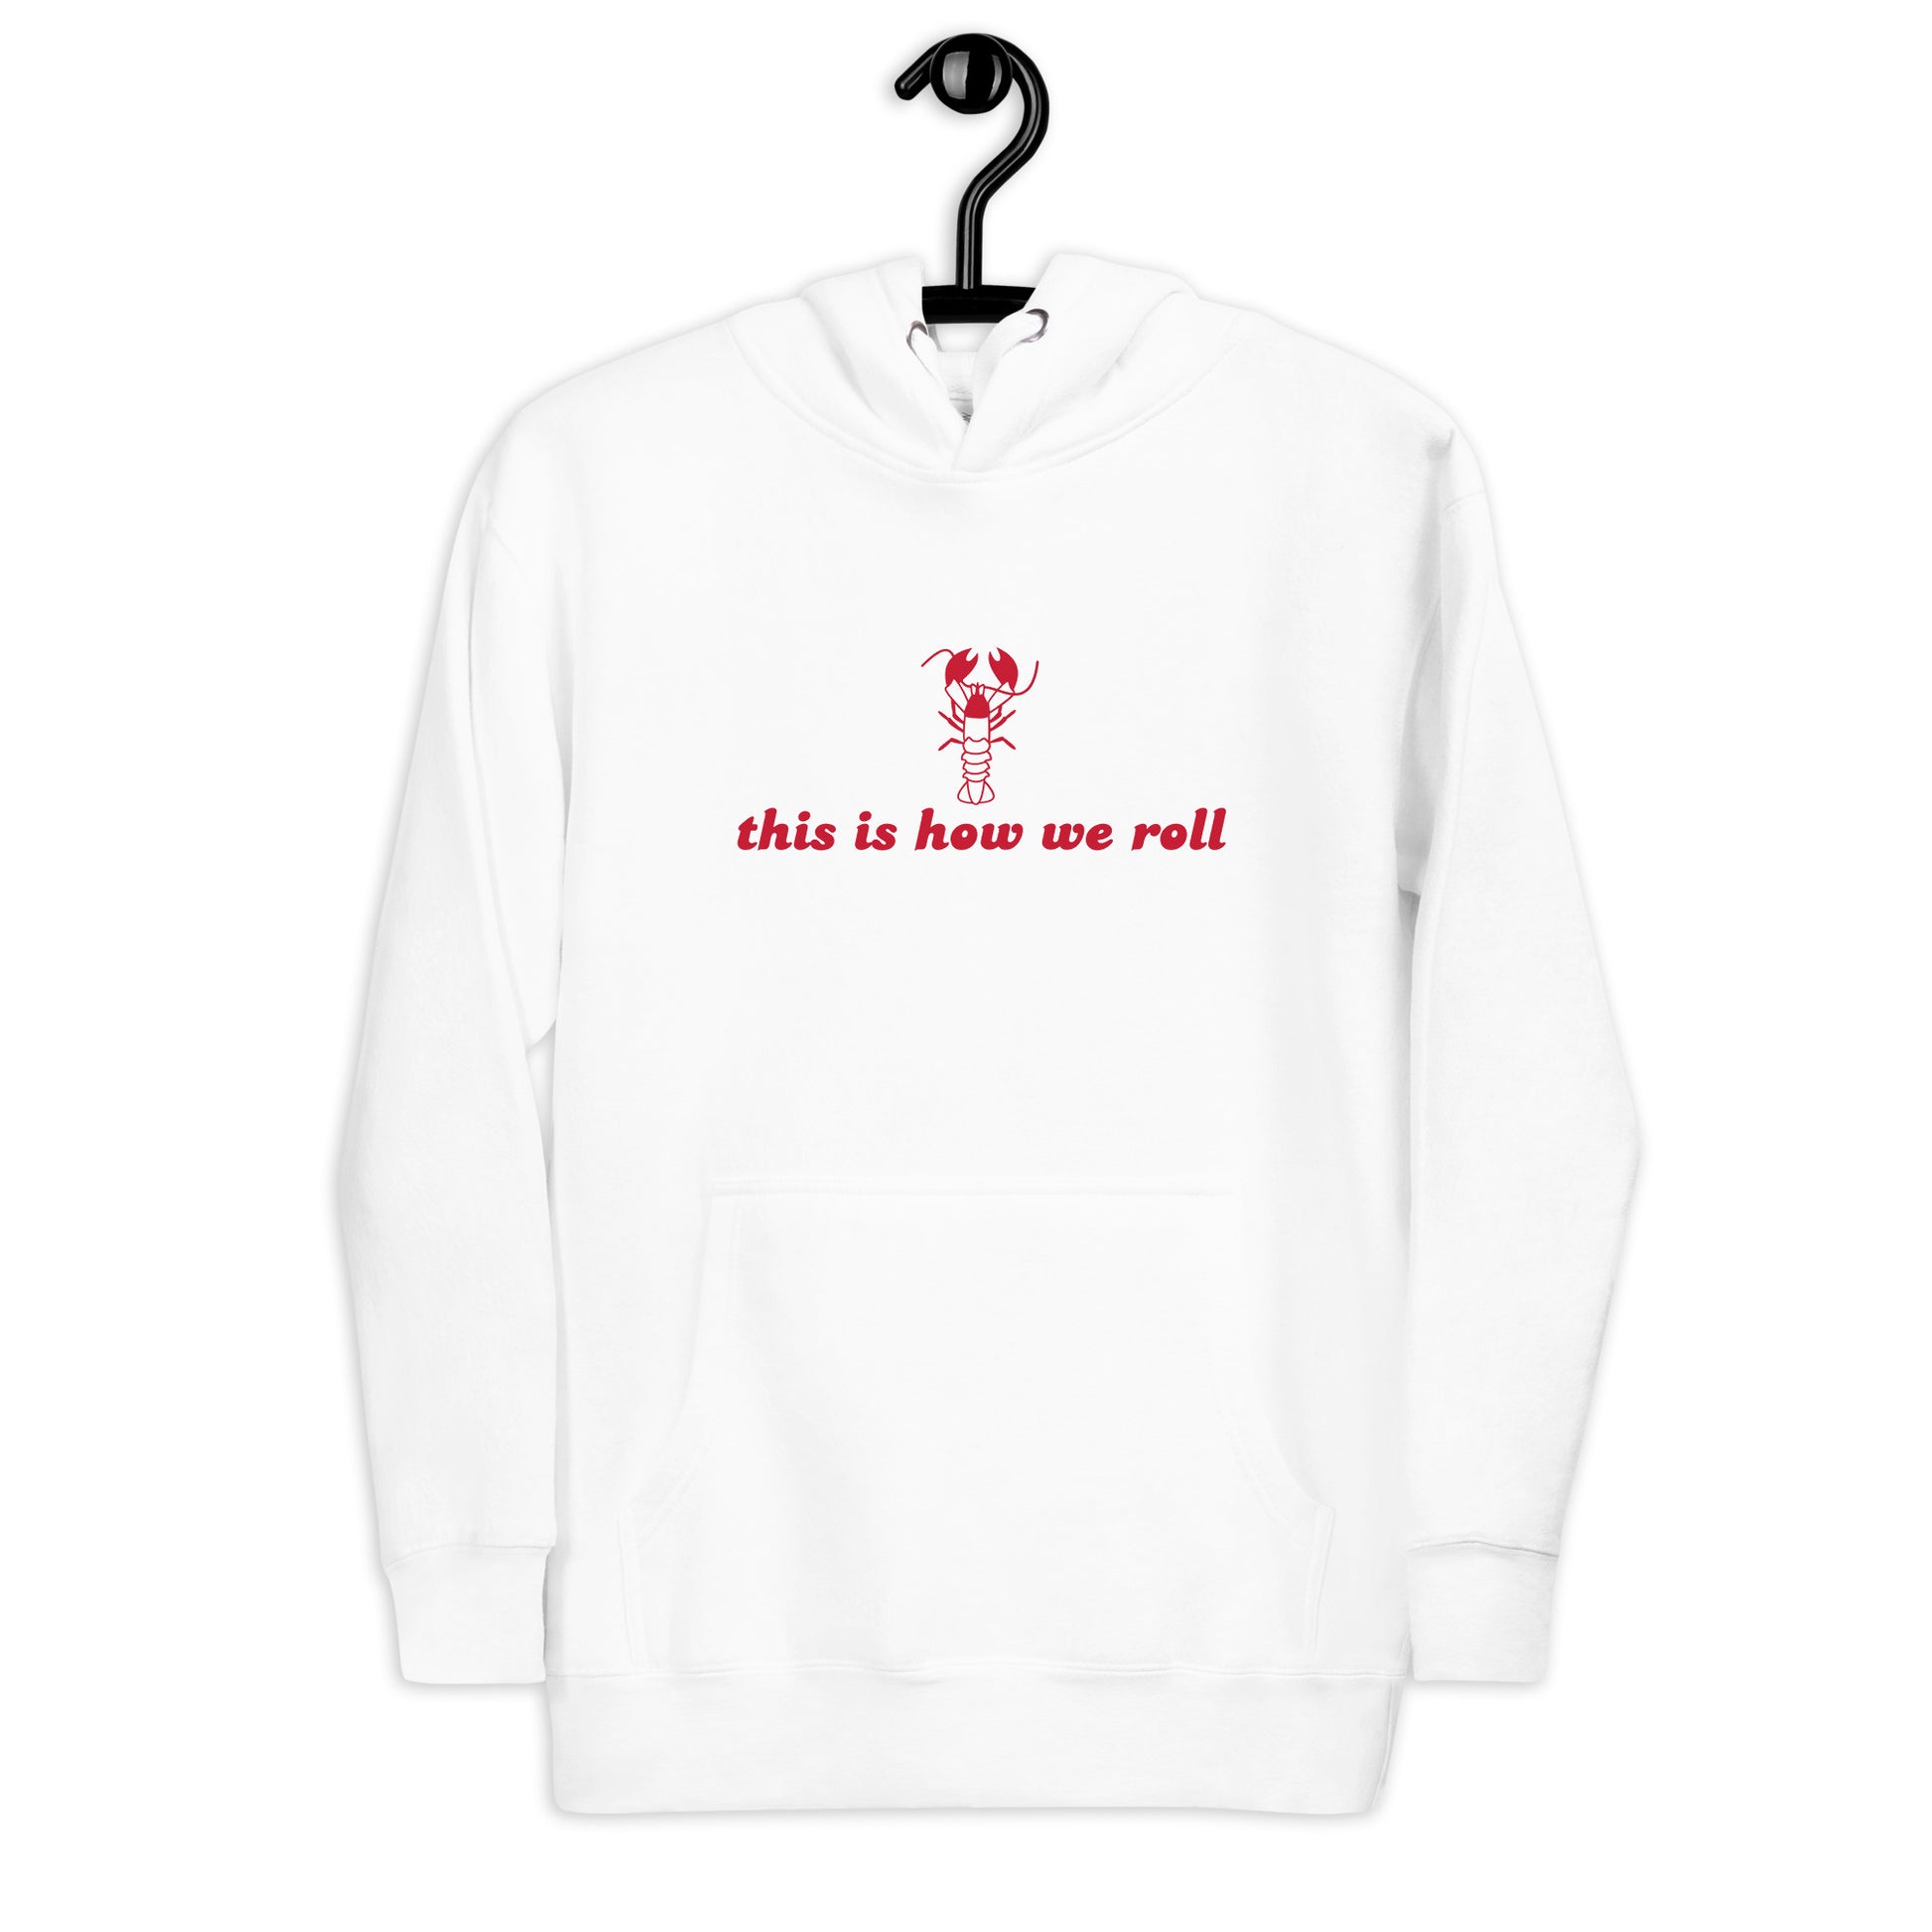 white hoodie that says "this is how we roll" in red lettering with red lobster graphic